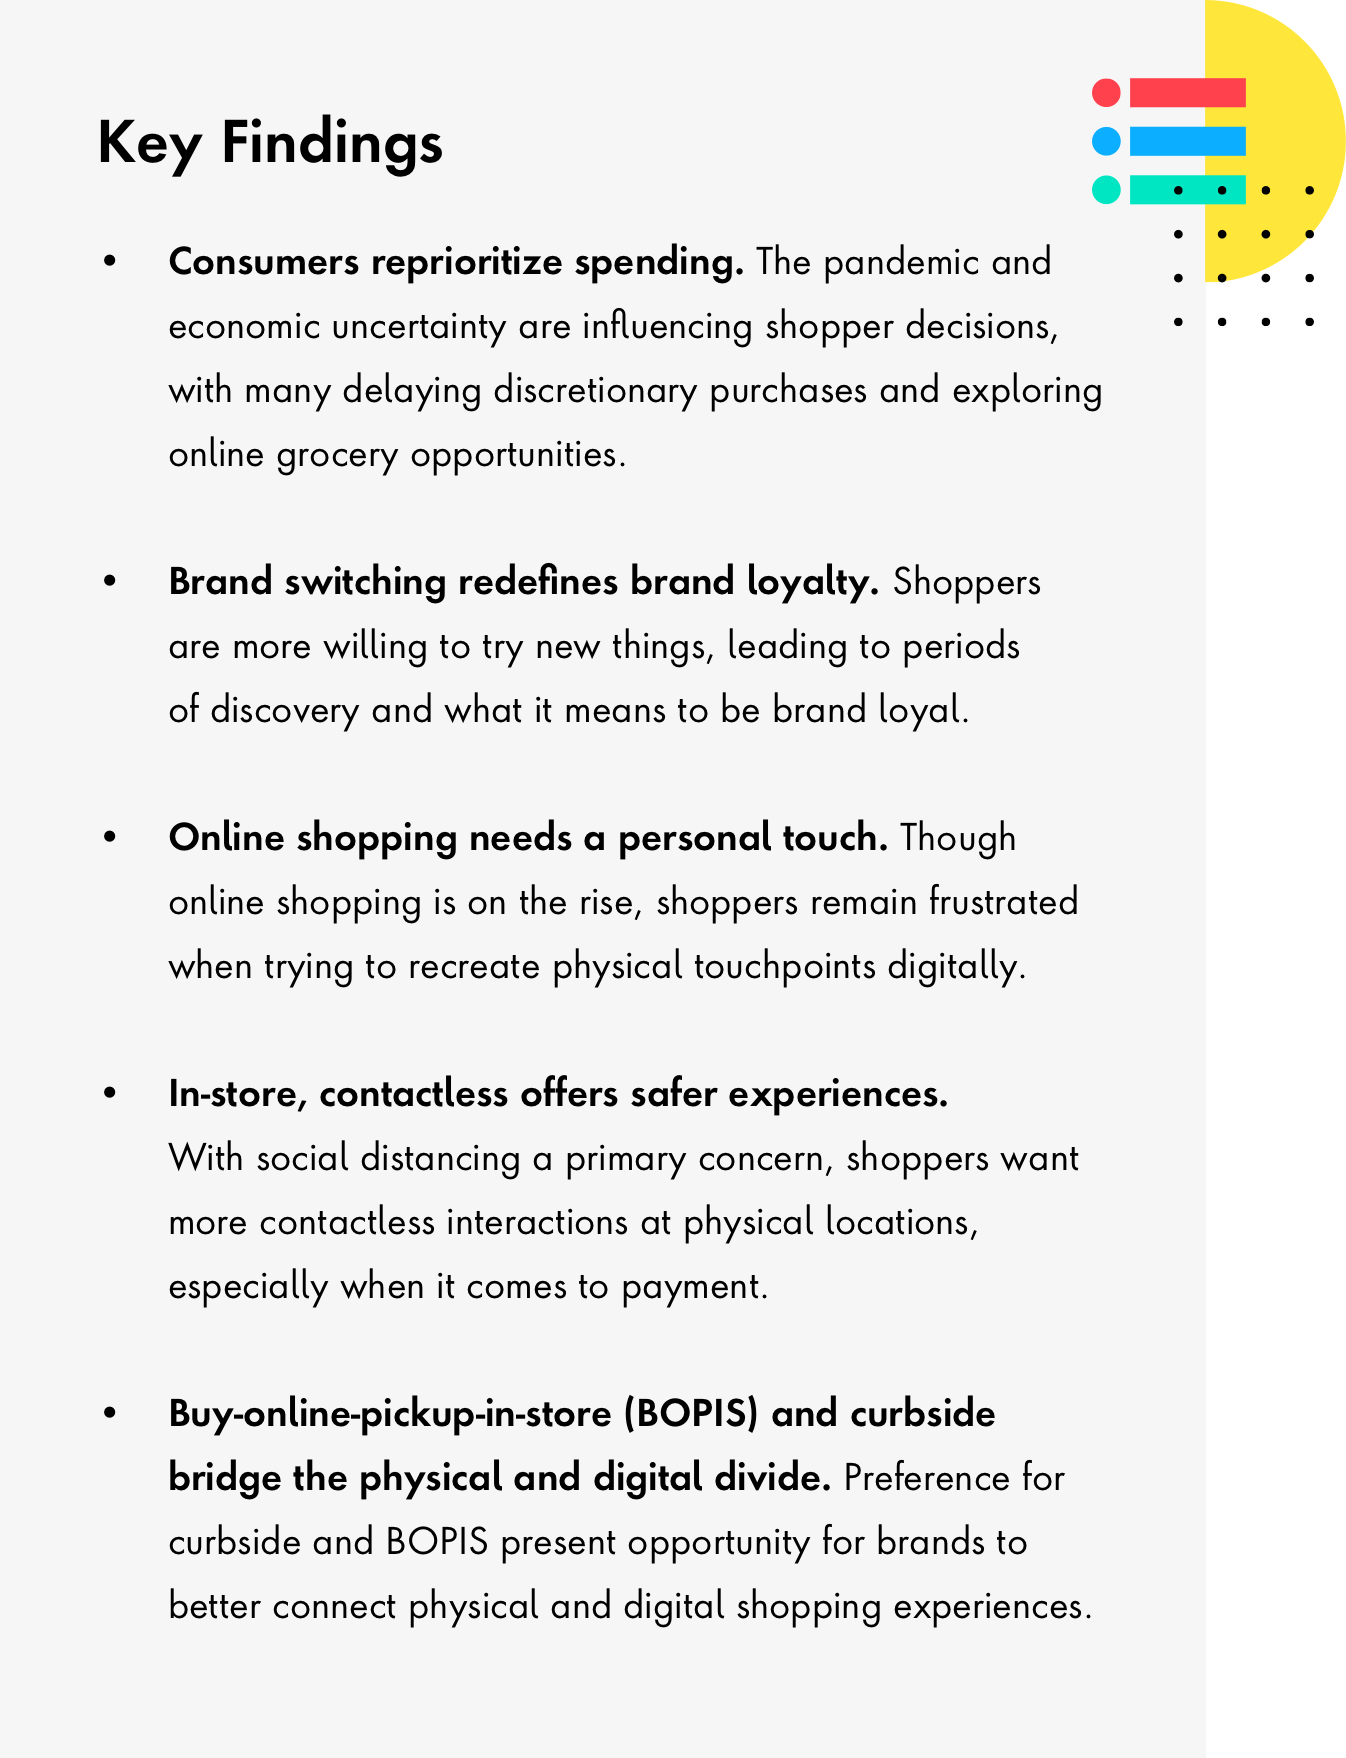 Key findings: Consumers reprioritize spending, brand switching redefinds brand loyalty, online shopping needs a personal touch, in-store contactless offers safer experiences, Buy-online-pickup-instore and curbside bridge the physical and digital divide.